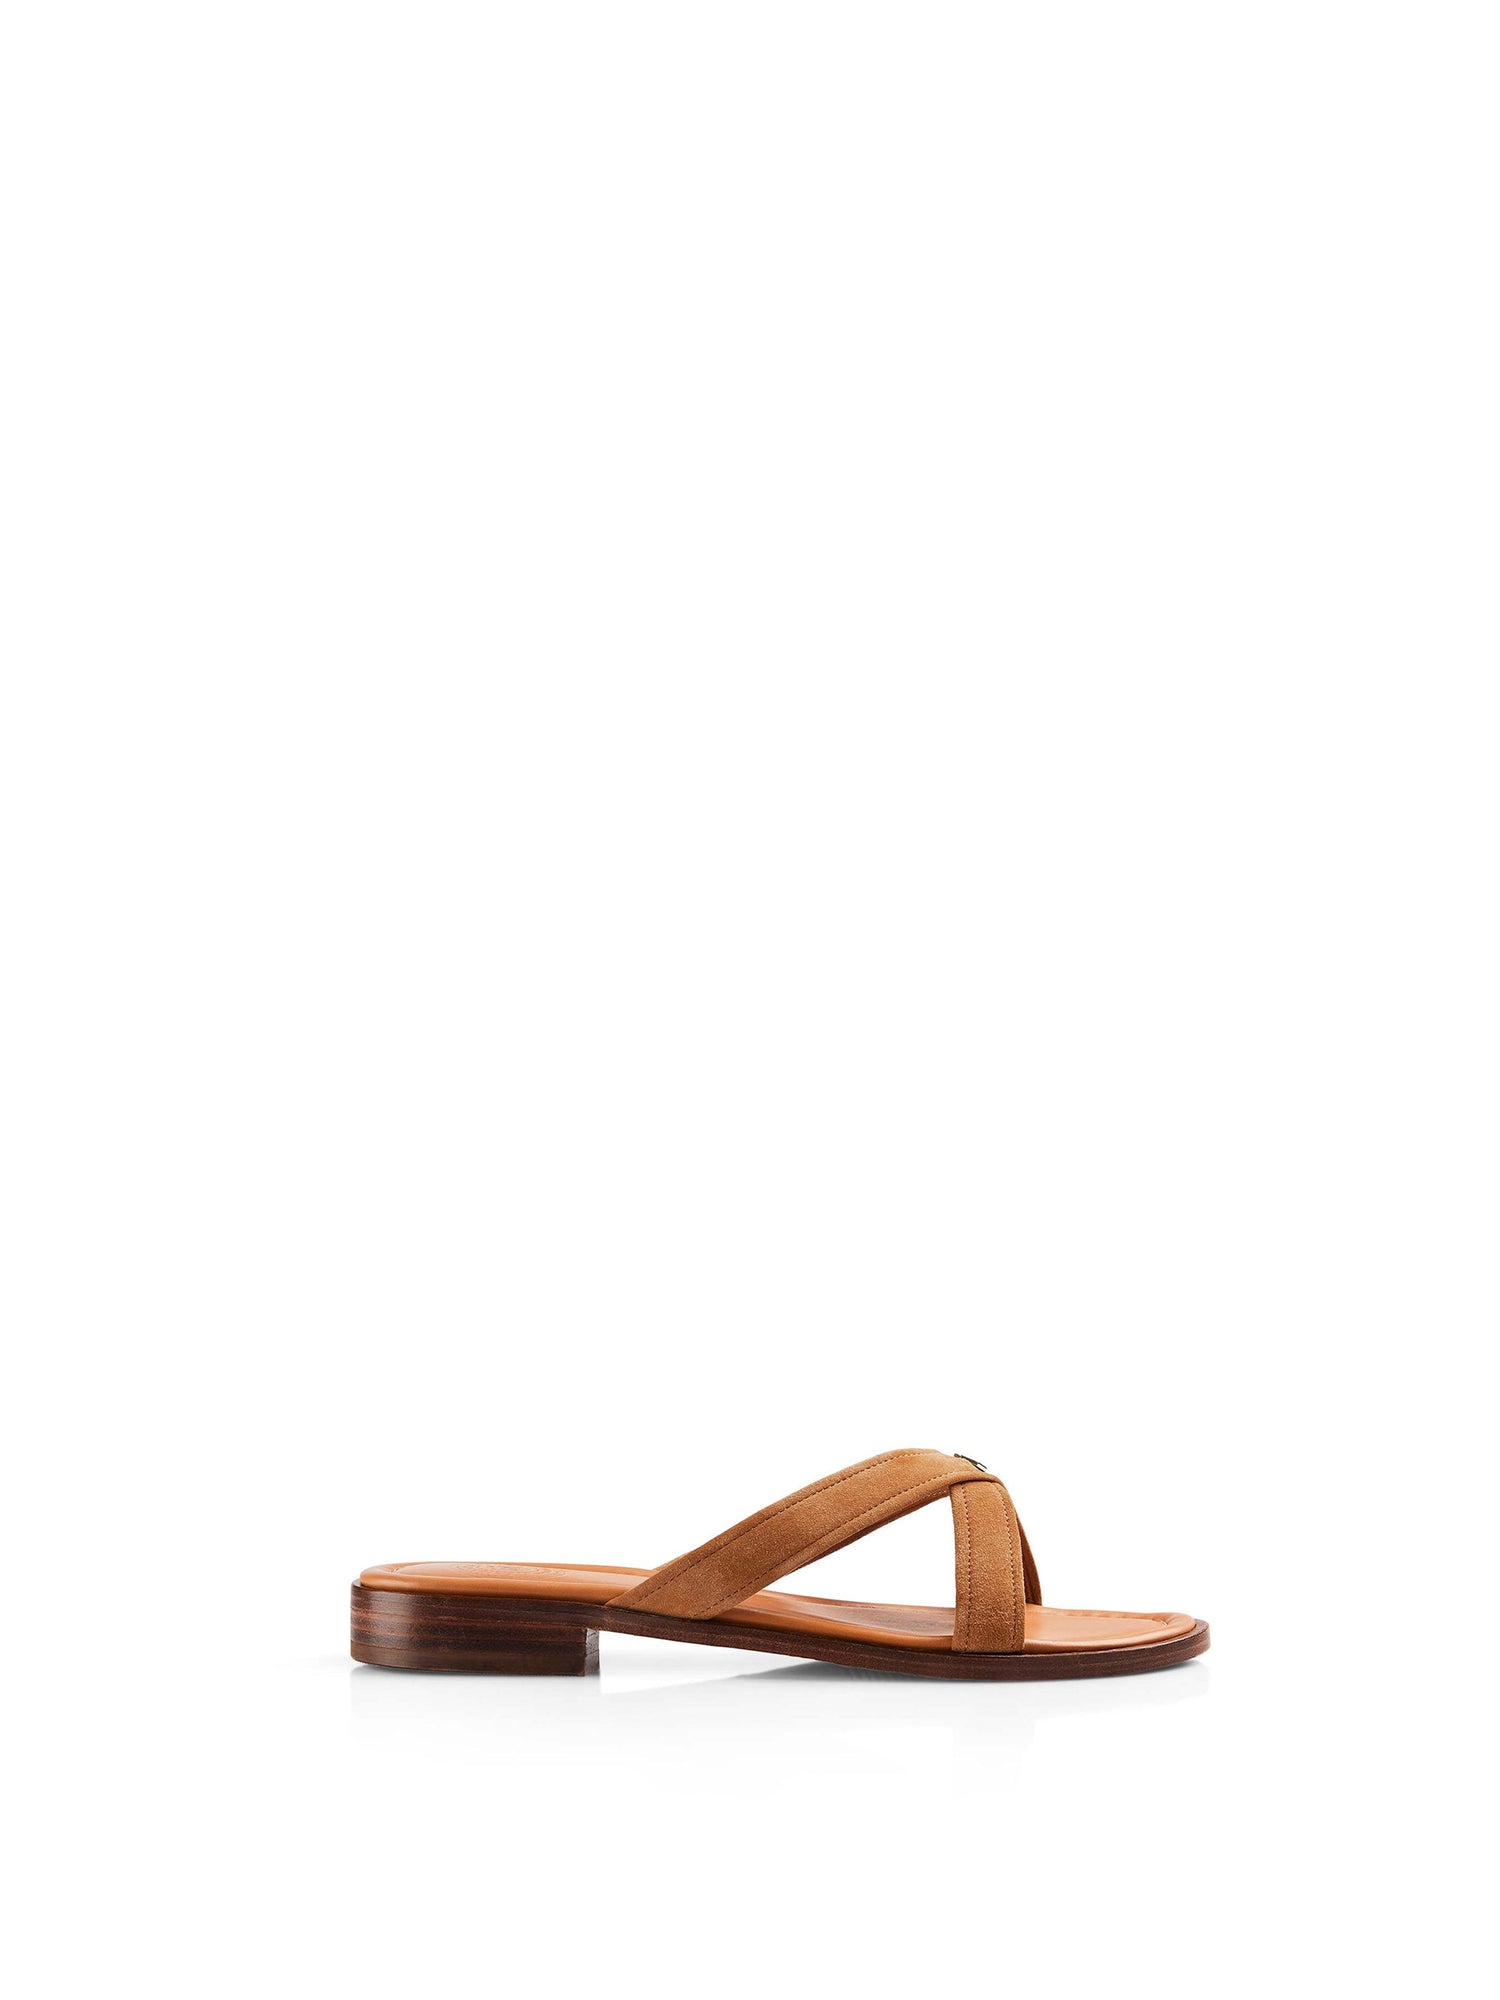 lv slipper - Flat Sandals & Flip Flops Prices and Promotions - Women Shoes  Oct 2023